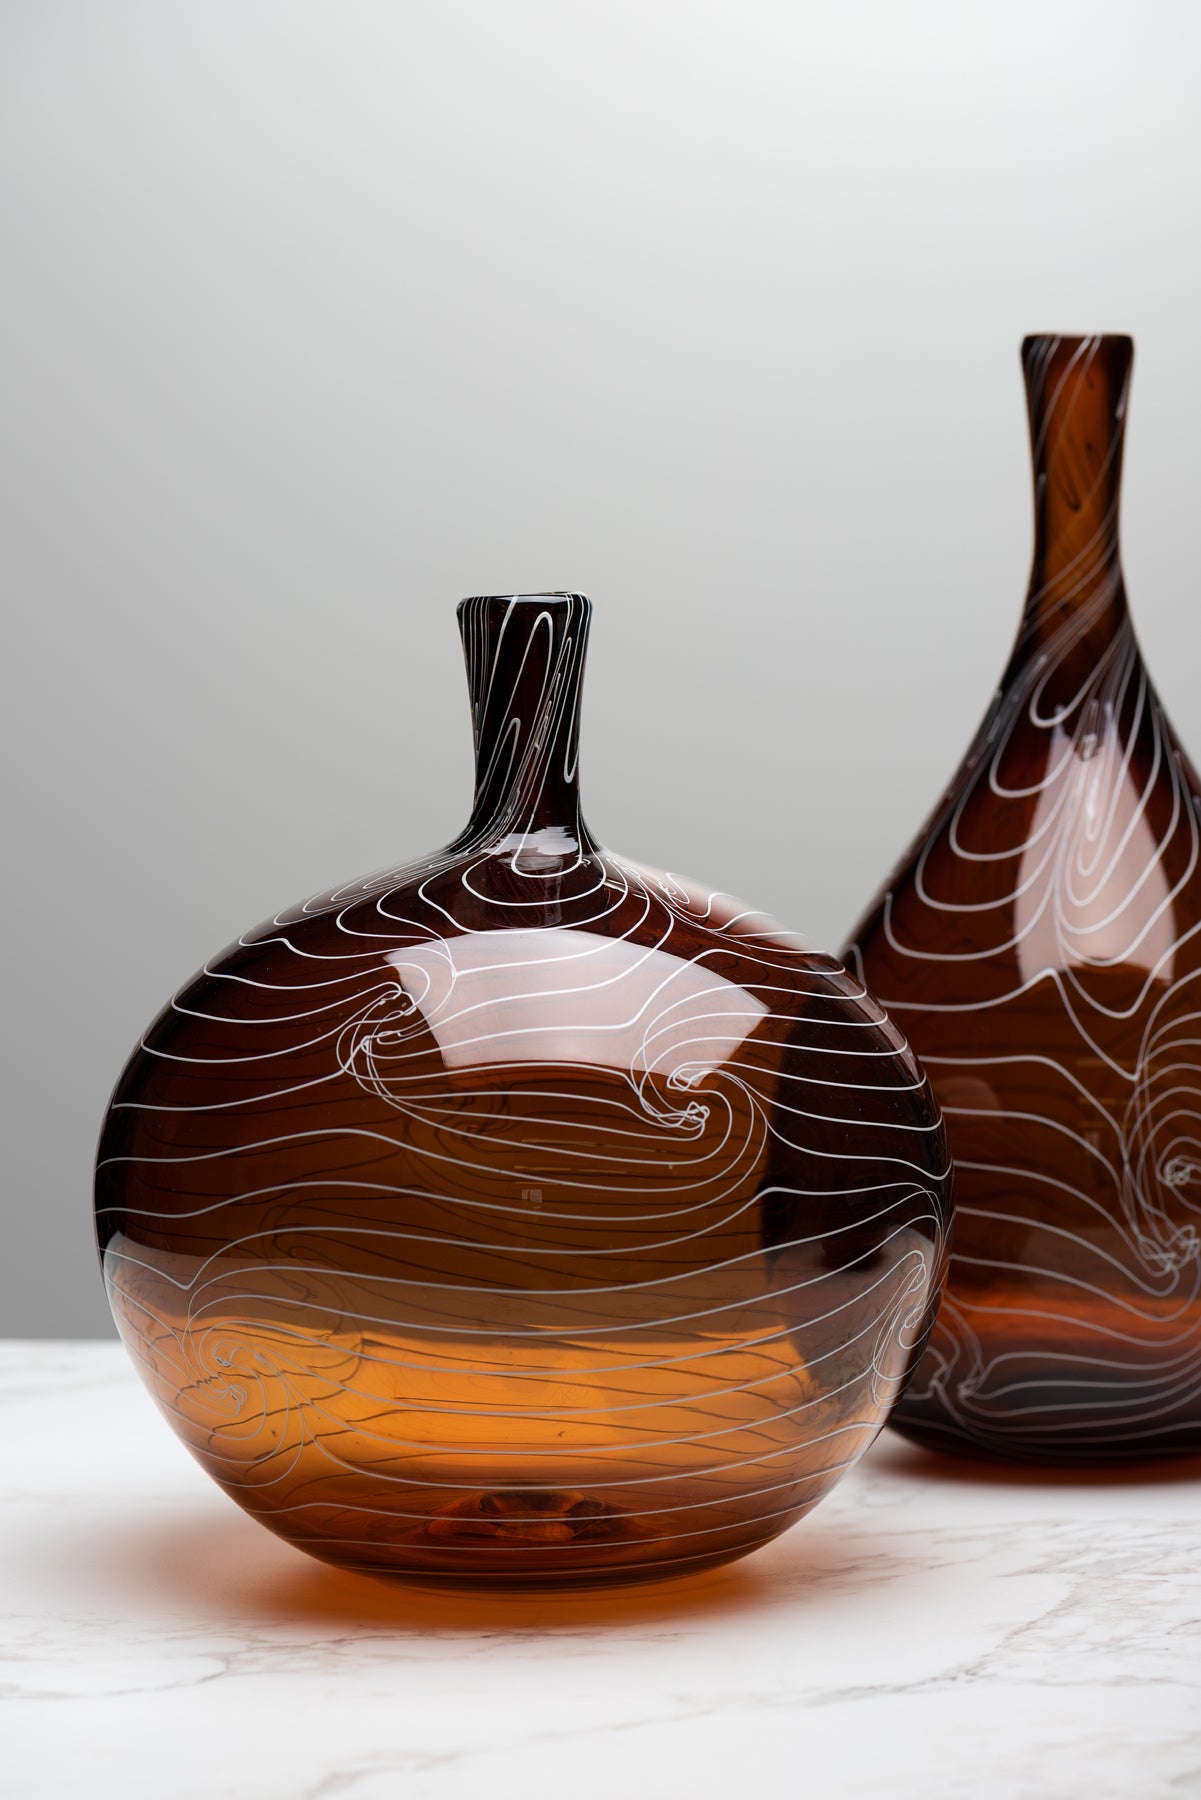 Two deep brown bottles by Small Batch Glass sit on a marble table against a grey background. Image by Loam